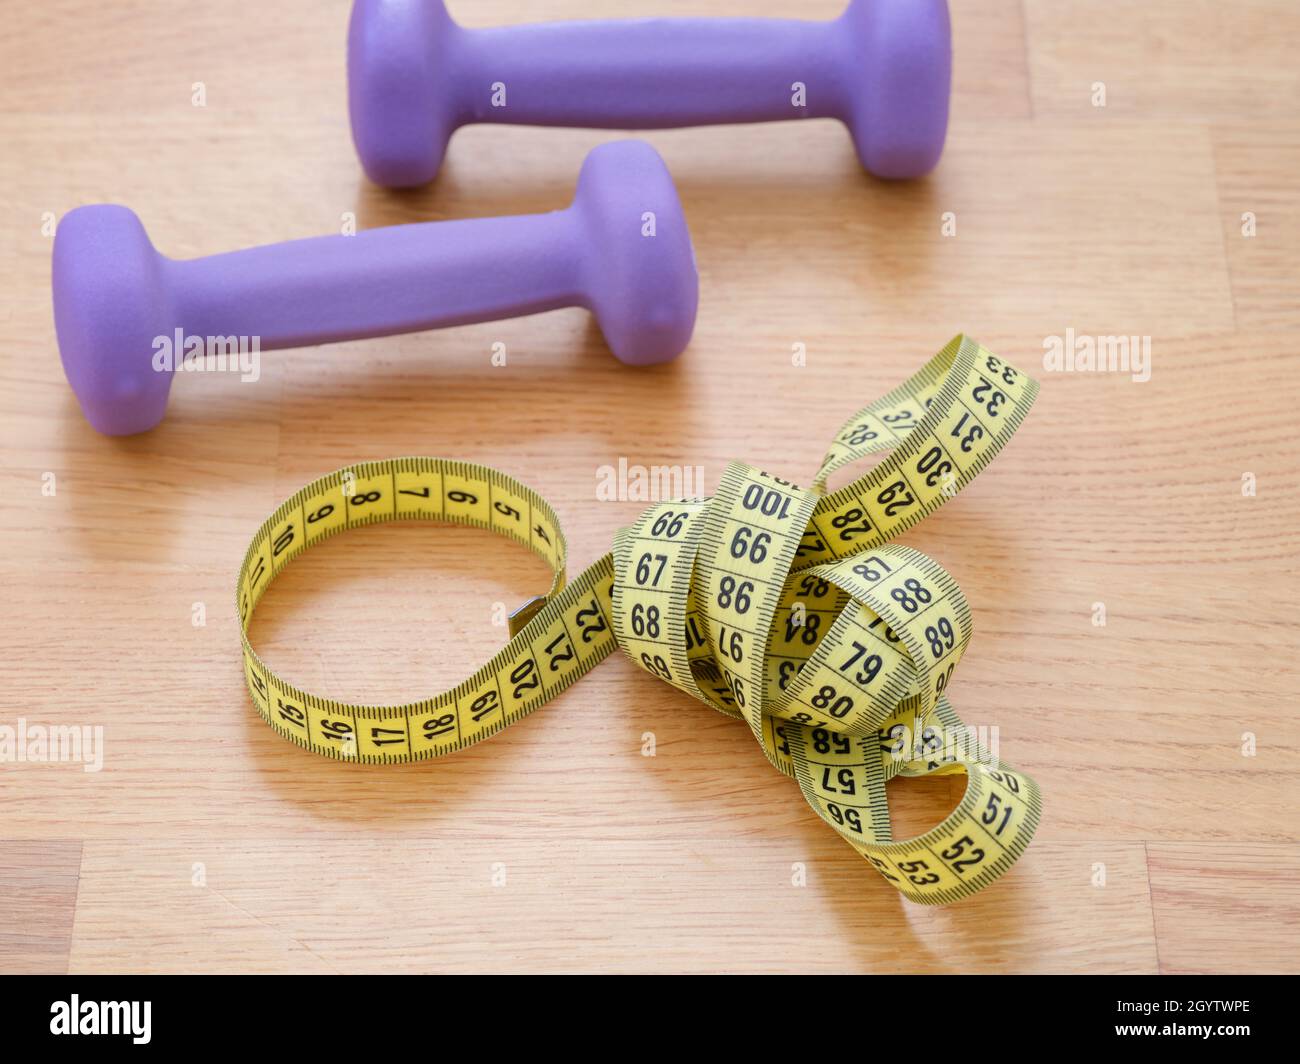 A tape measure and dumbbells lying on the floor. Close up. Stock Photo